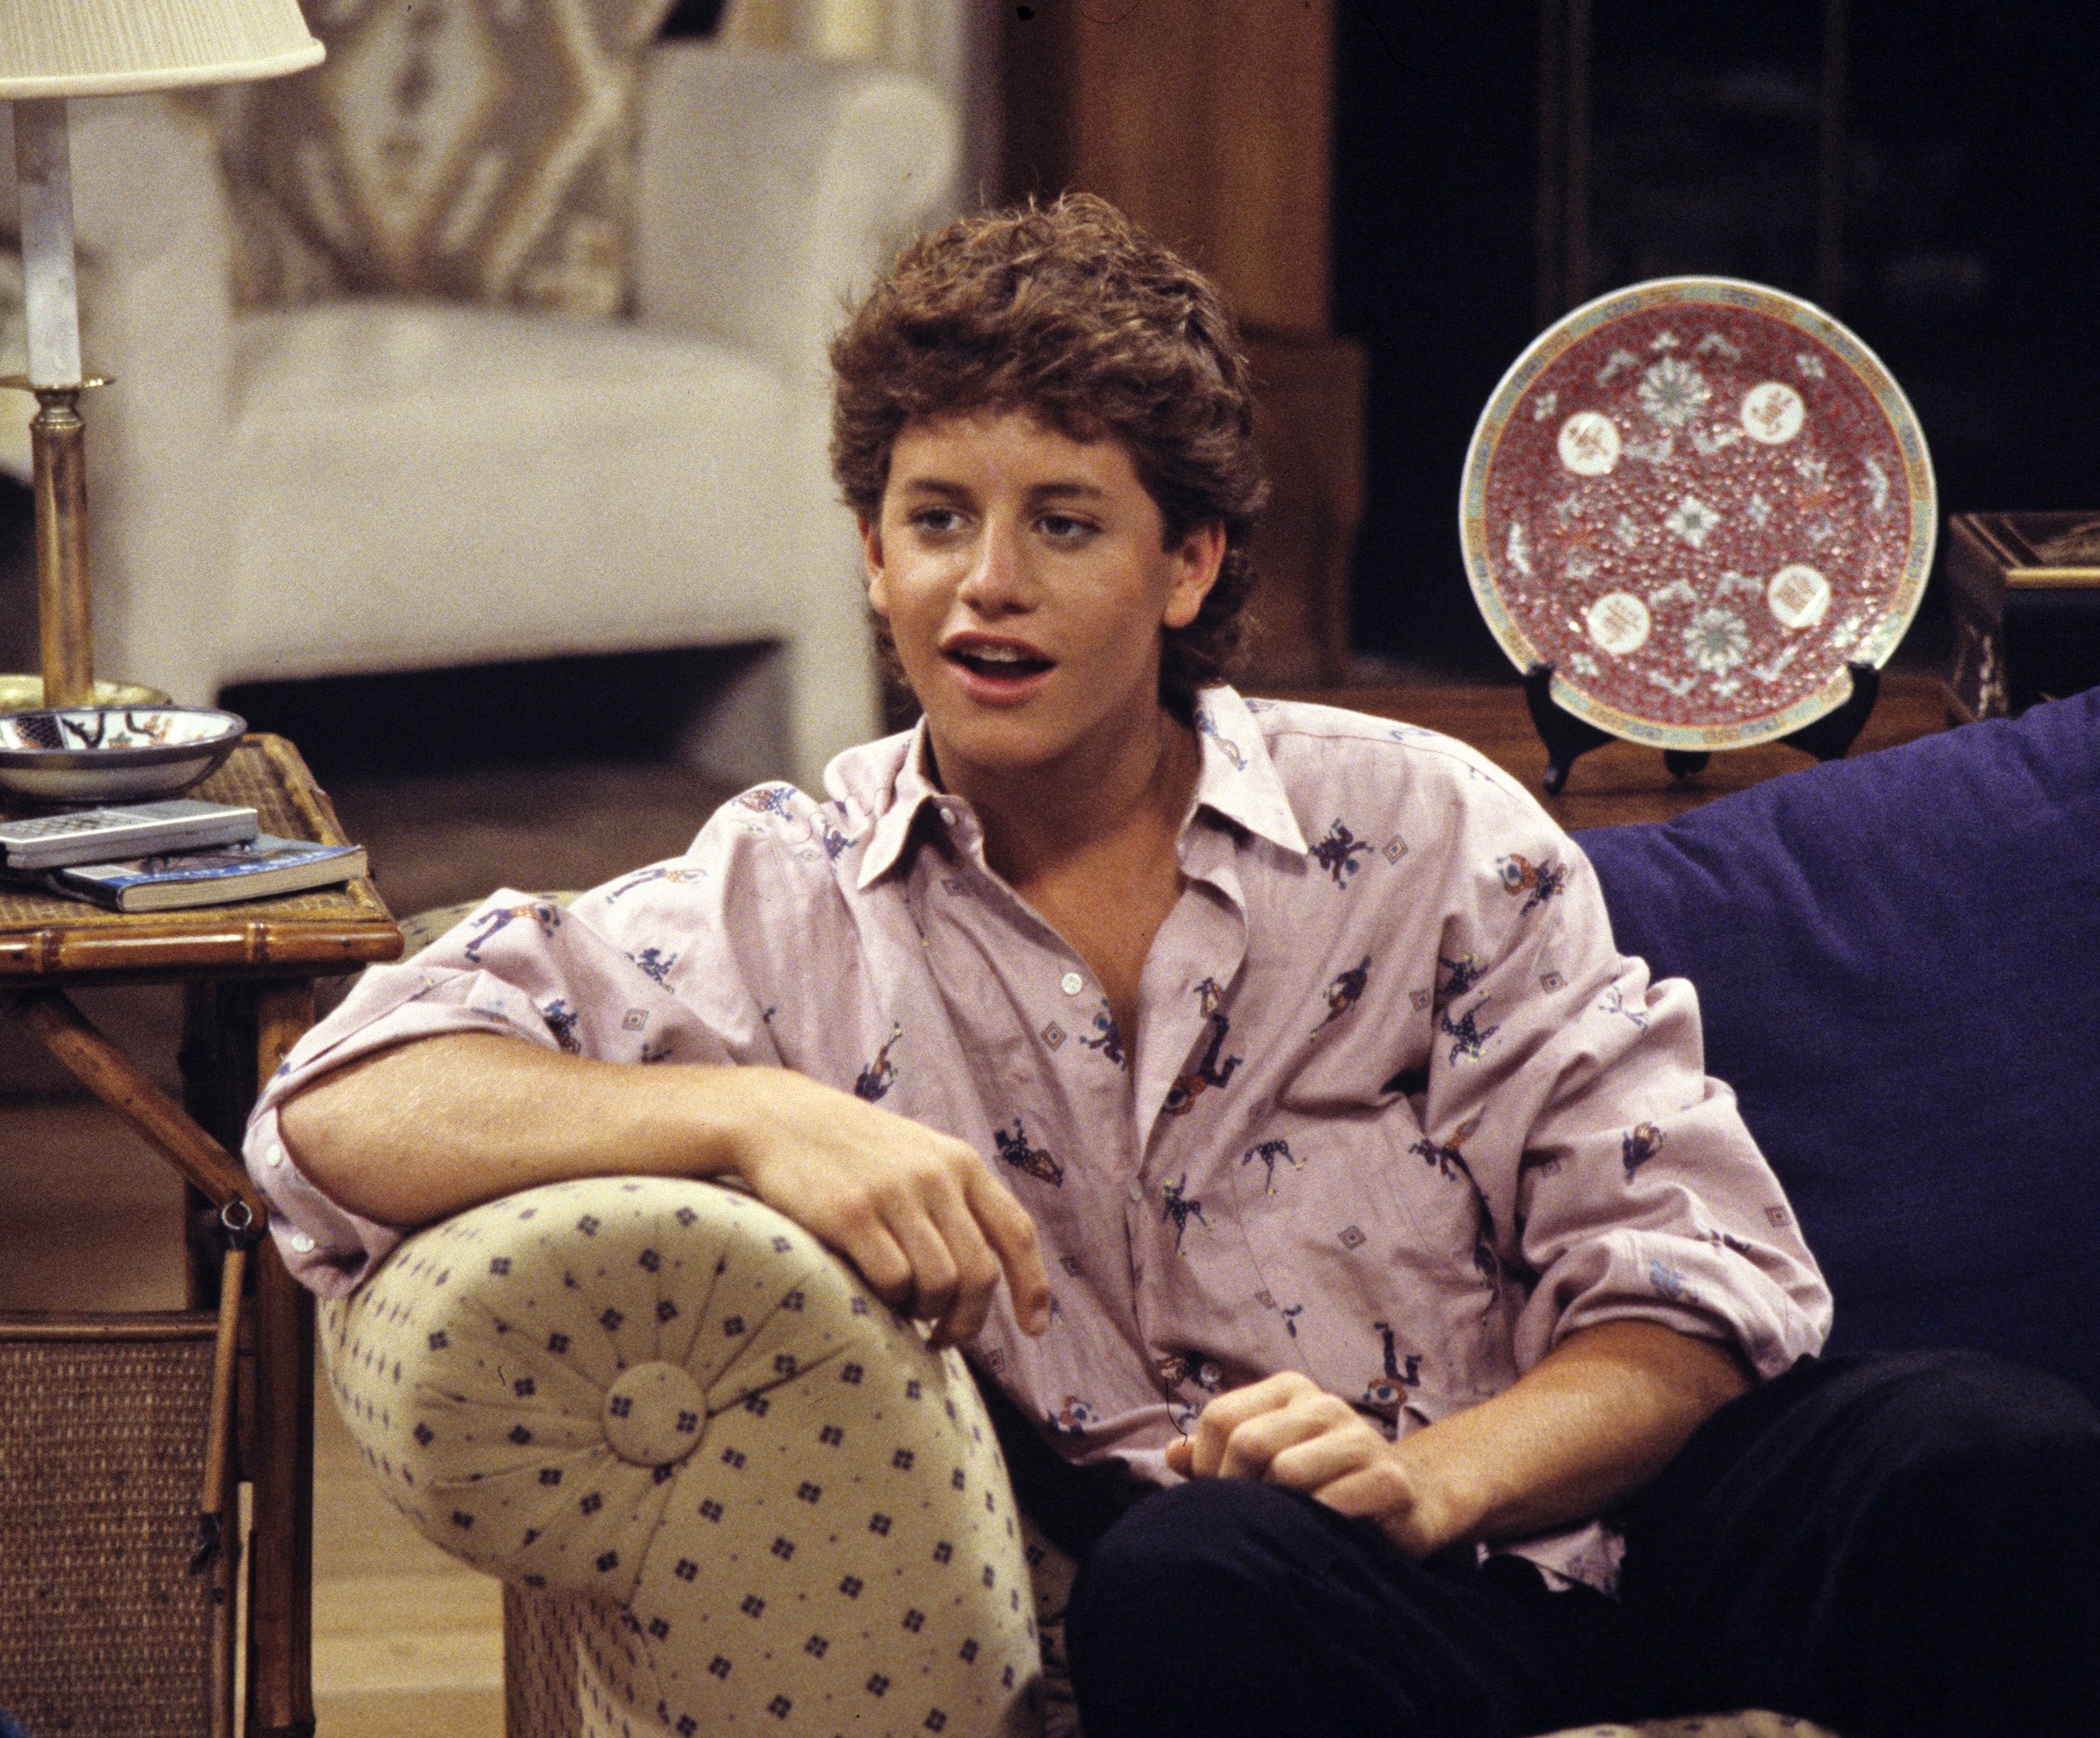 Actor Kirk Cameron as Mike Seaver in he family sitcom, "Growing Pains" on January 6, 1987 | Source: Getty Images